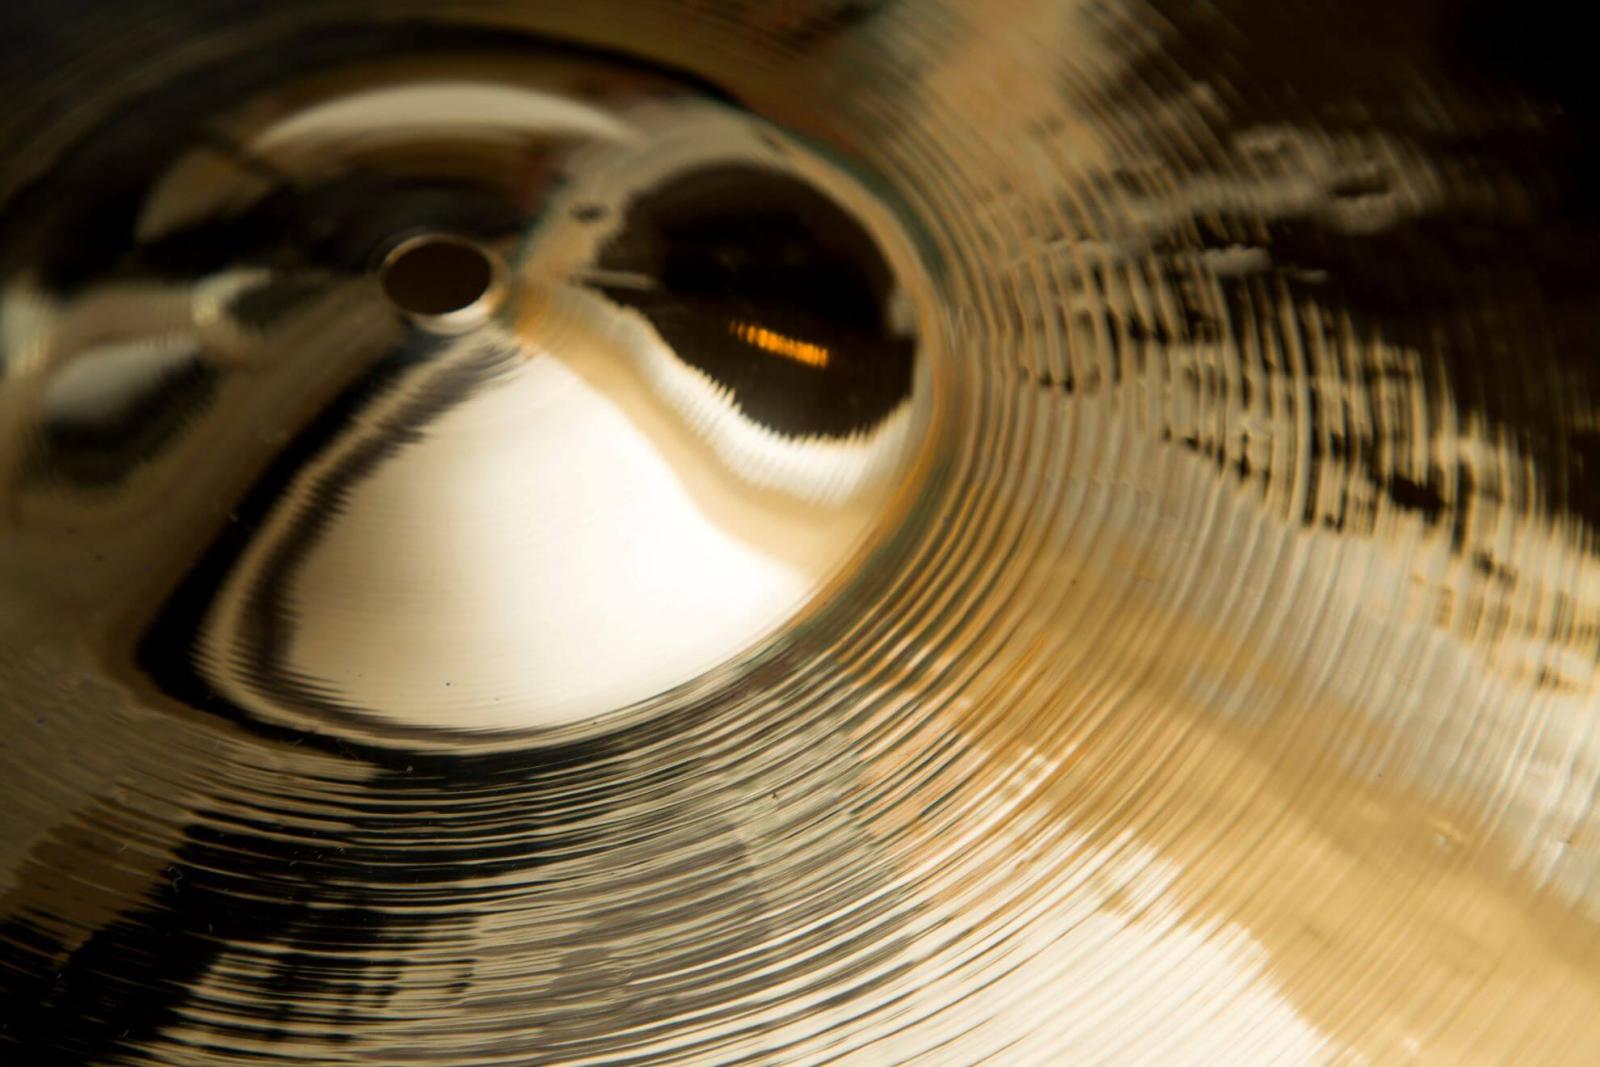 A cymbal with a reflective finish after being polished and cleaned